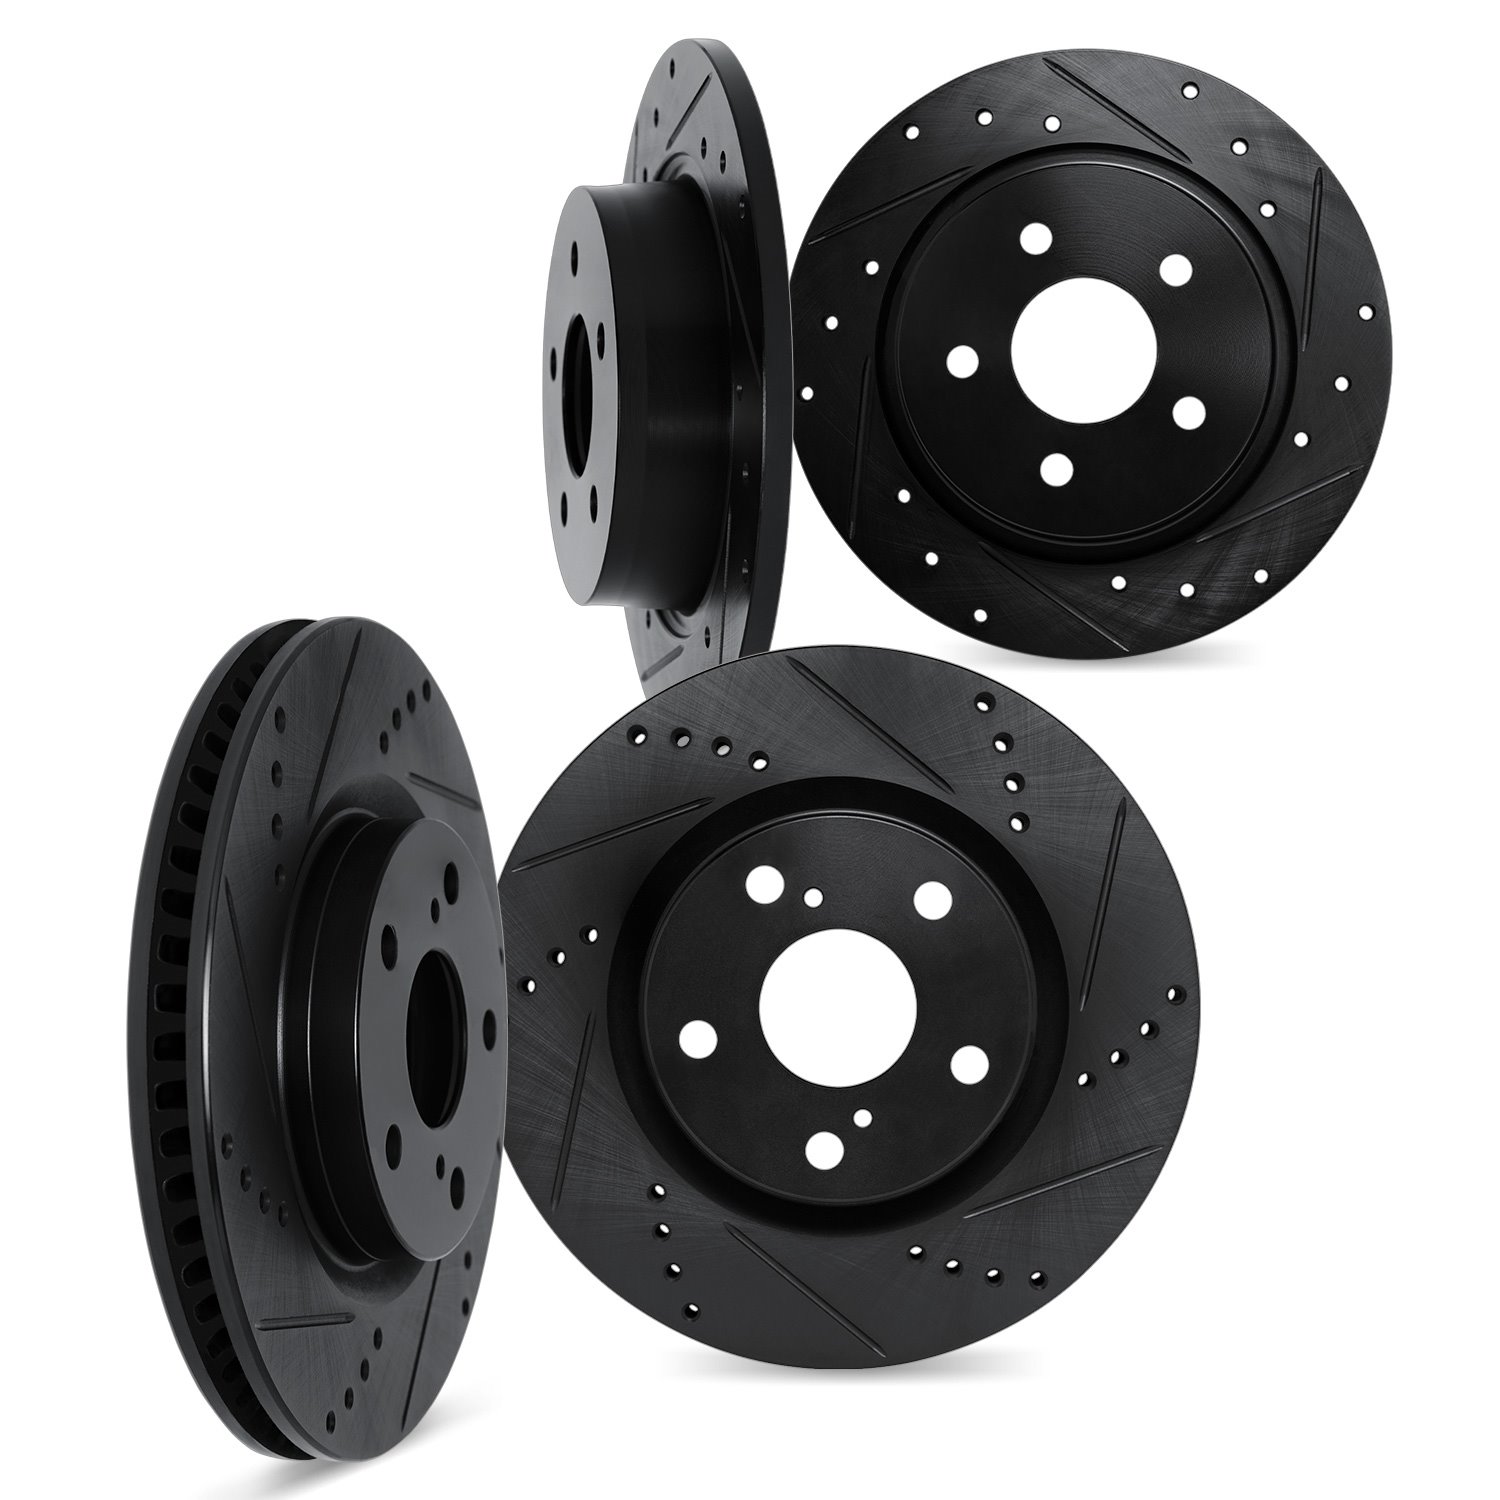 8004-42010 Drilled/Slotted Brake Rotors [Black], Fits Select Mopar, Position: Front and Rear